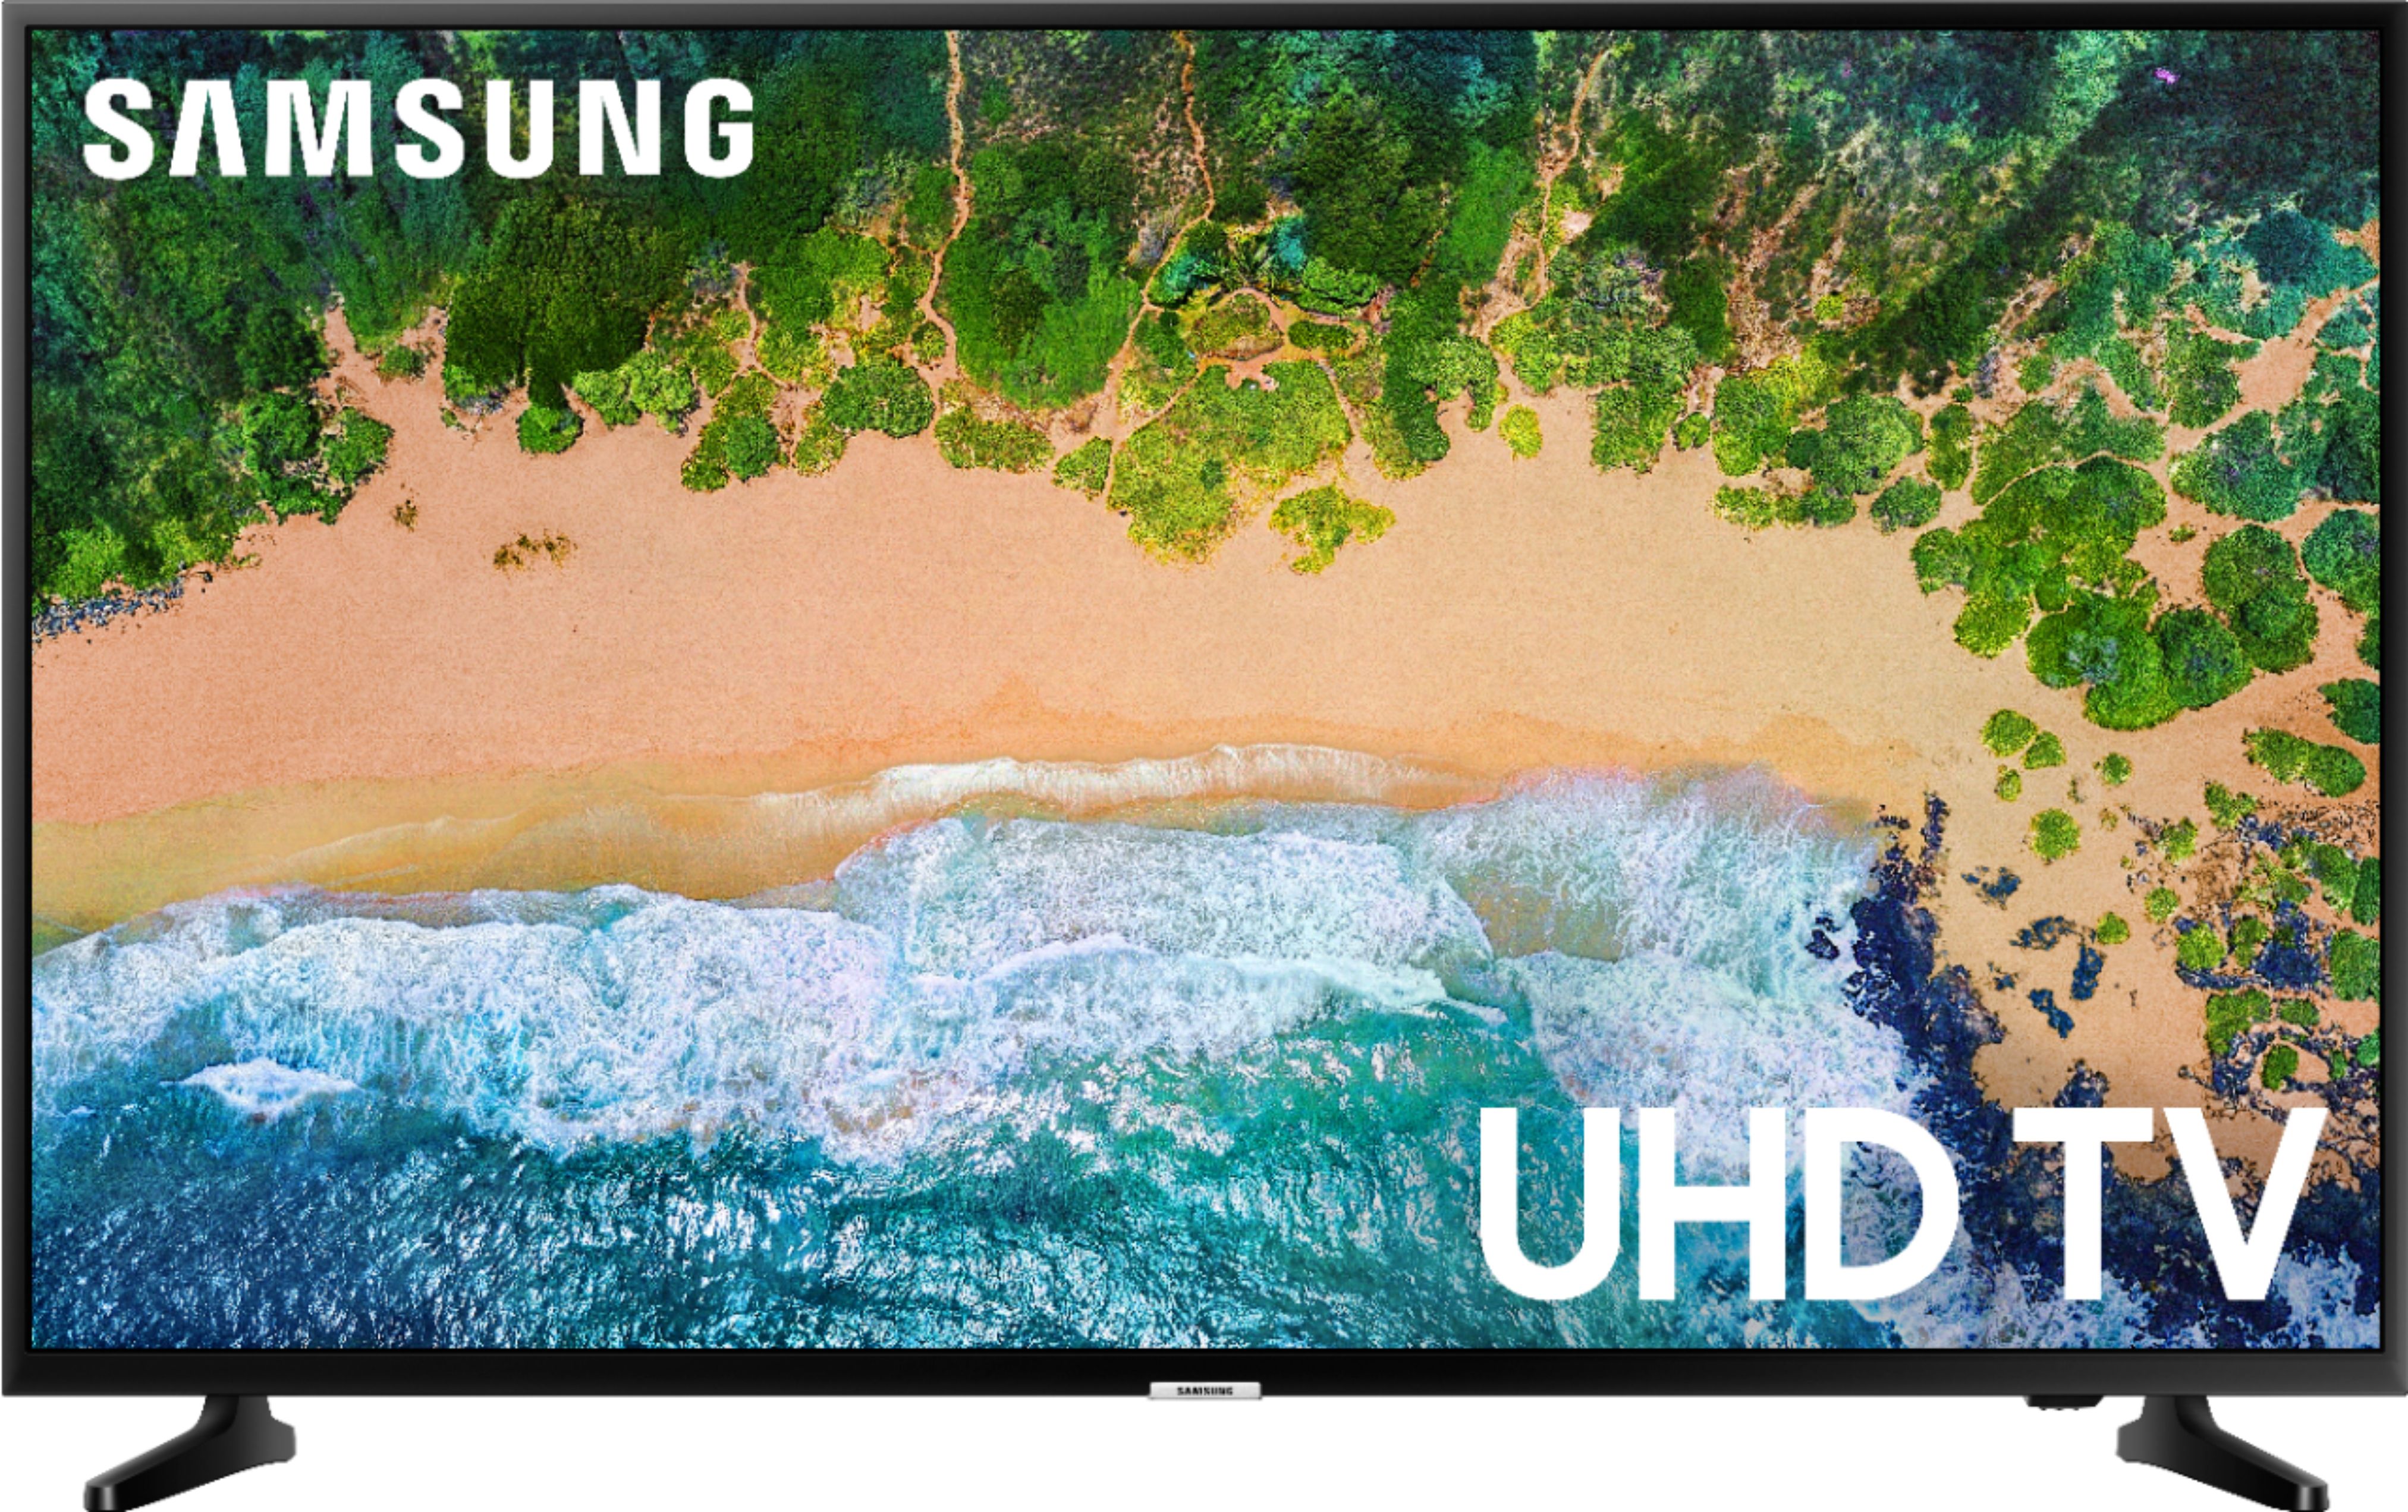 Samsung 65 Class Led Nu6900 Series 2160p Smart 4k Uhd Tv With Hdr